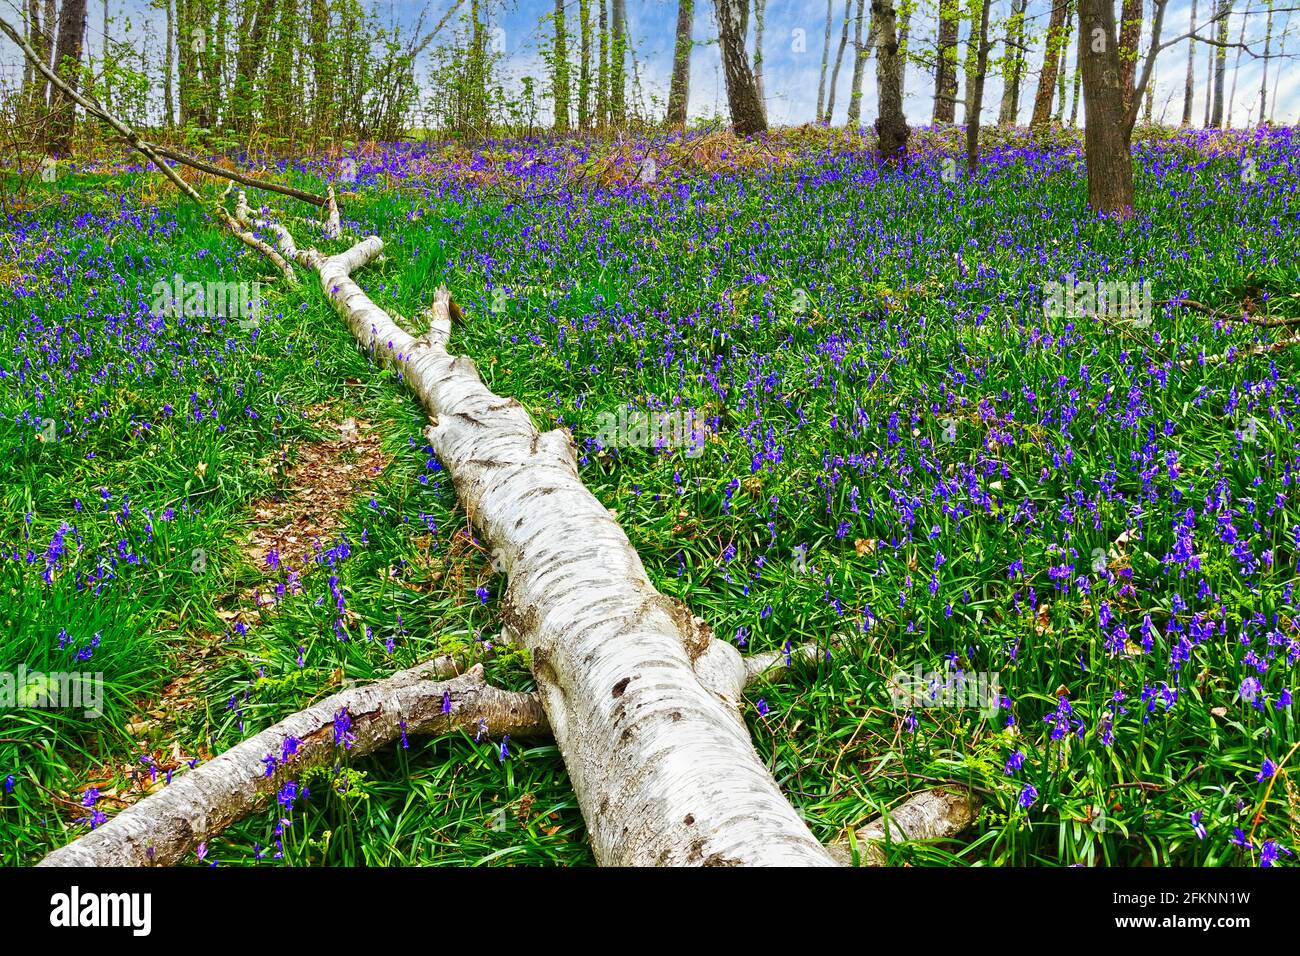 Carpet of beautiful bluebell flowers, Hyacinthoides non-scripta, in the bluebell forest at the town of Baal, Germany Stock Photo